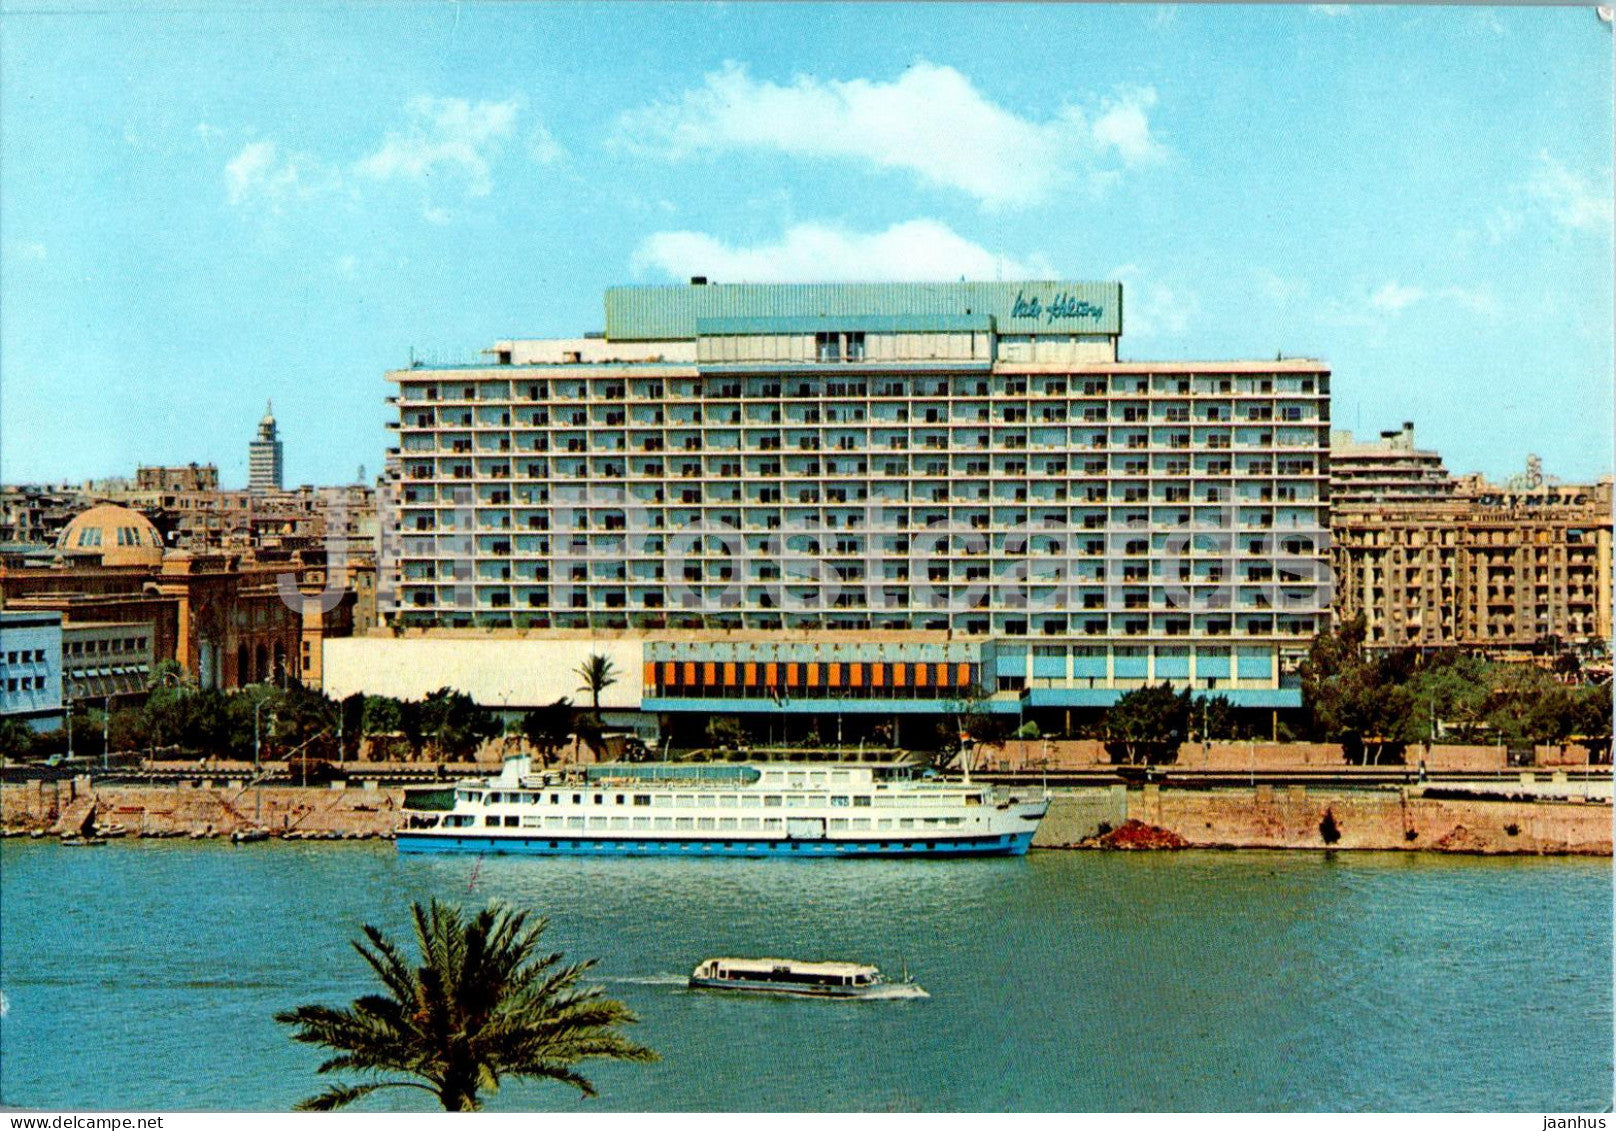 Cairo - Nile Hilton Hotel and the Isis Floating Hotel - ship - 17 - Egypt - unused - JH Postcards